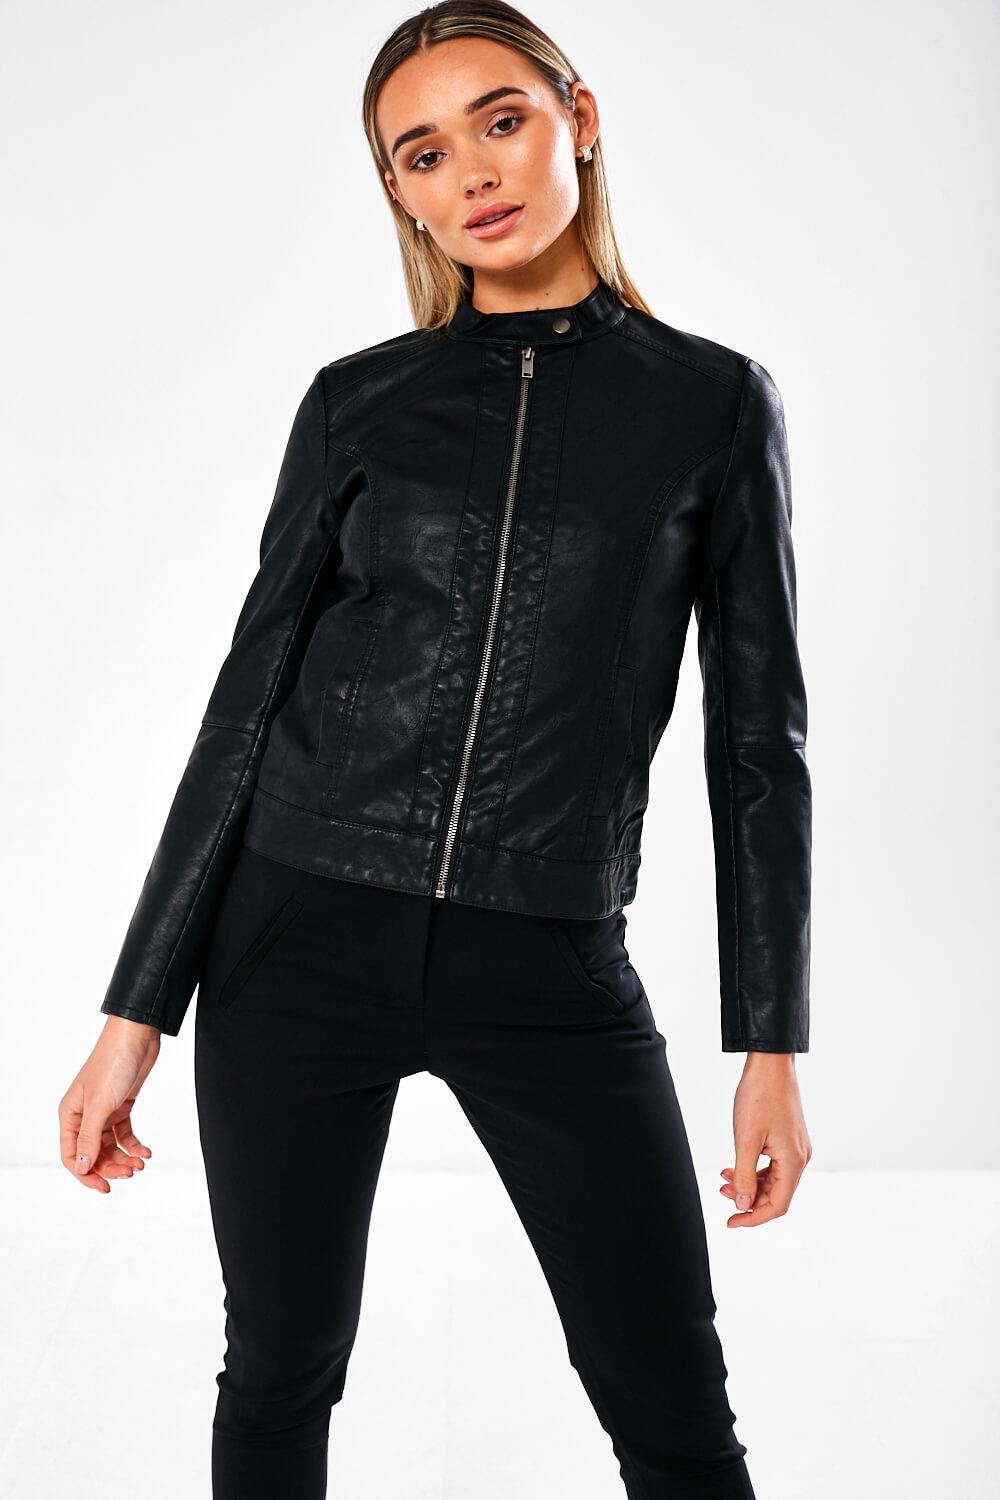 JDY Dallas Faux Leather Jacket in Black | iCLOTHING - iCLOTHING